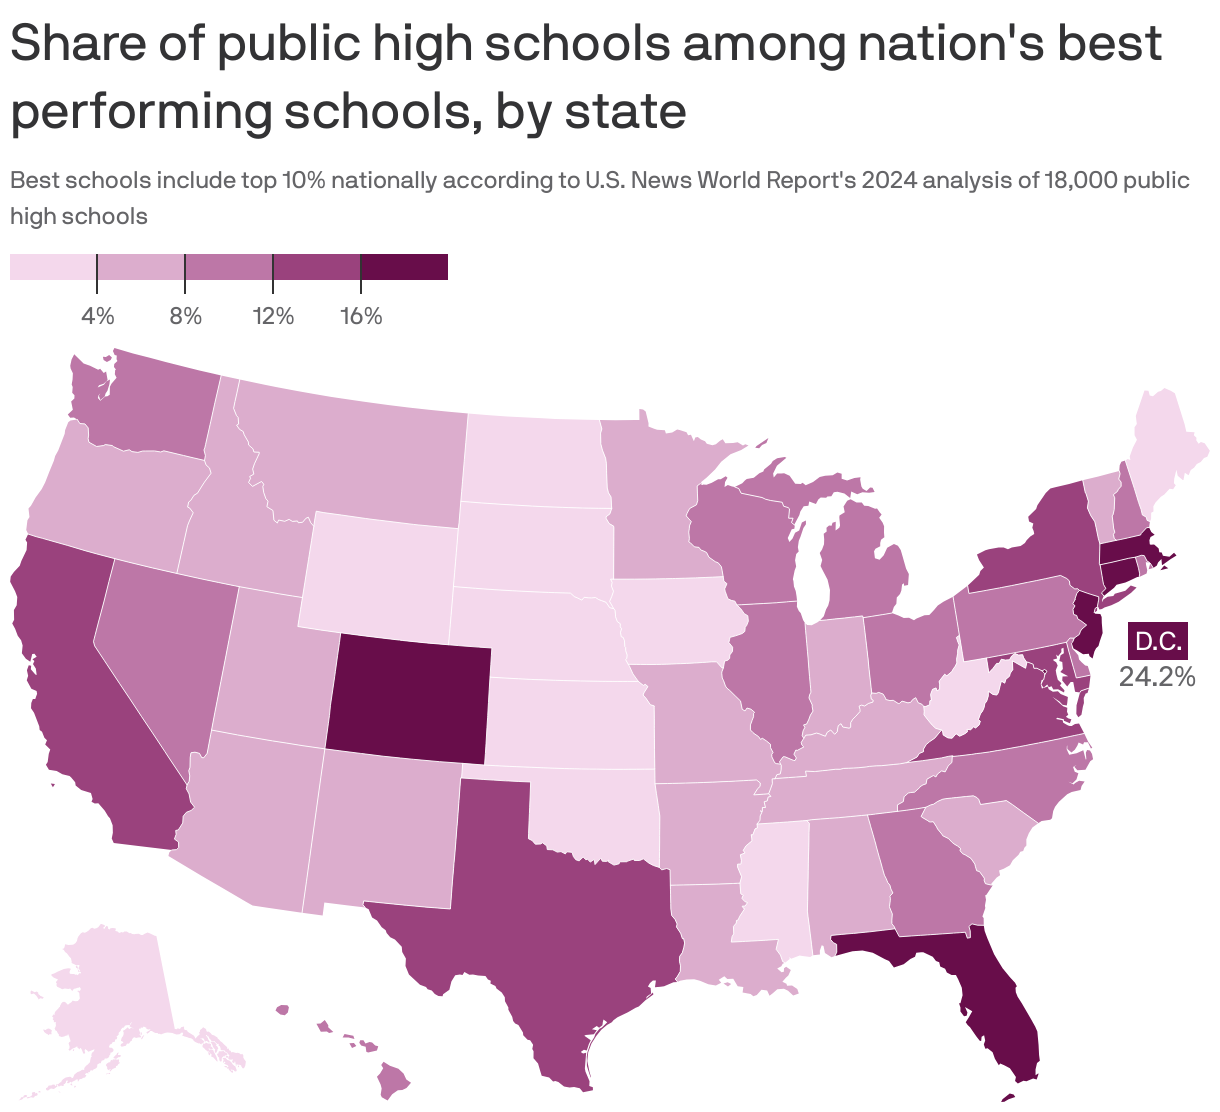 Share of public high schools among nation's best performing schools, by state